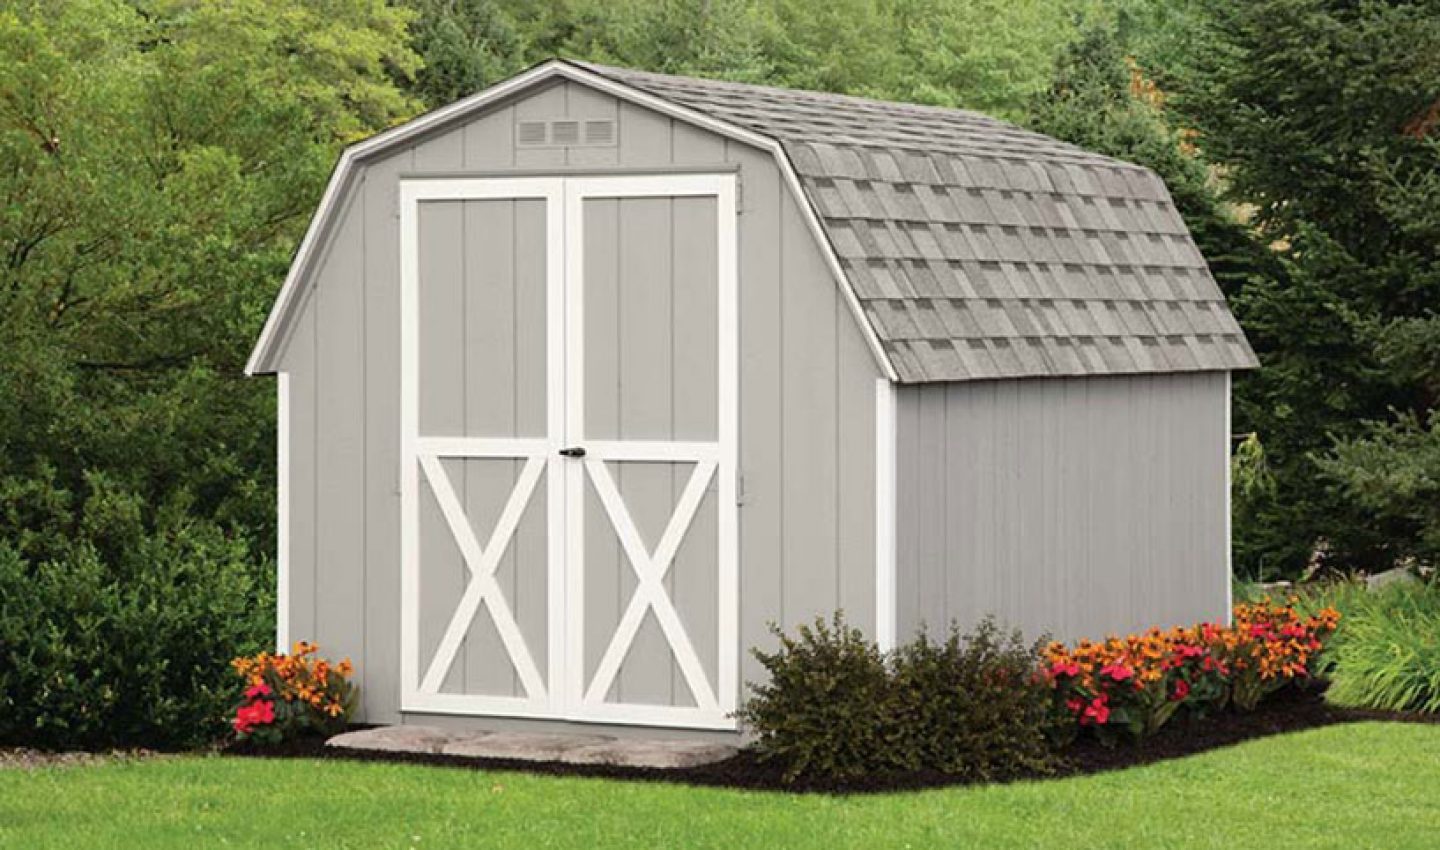 Mini Barns: For Storage & Rustic Style